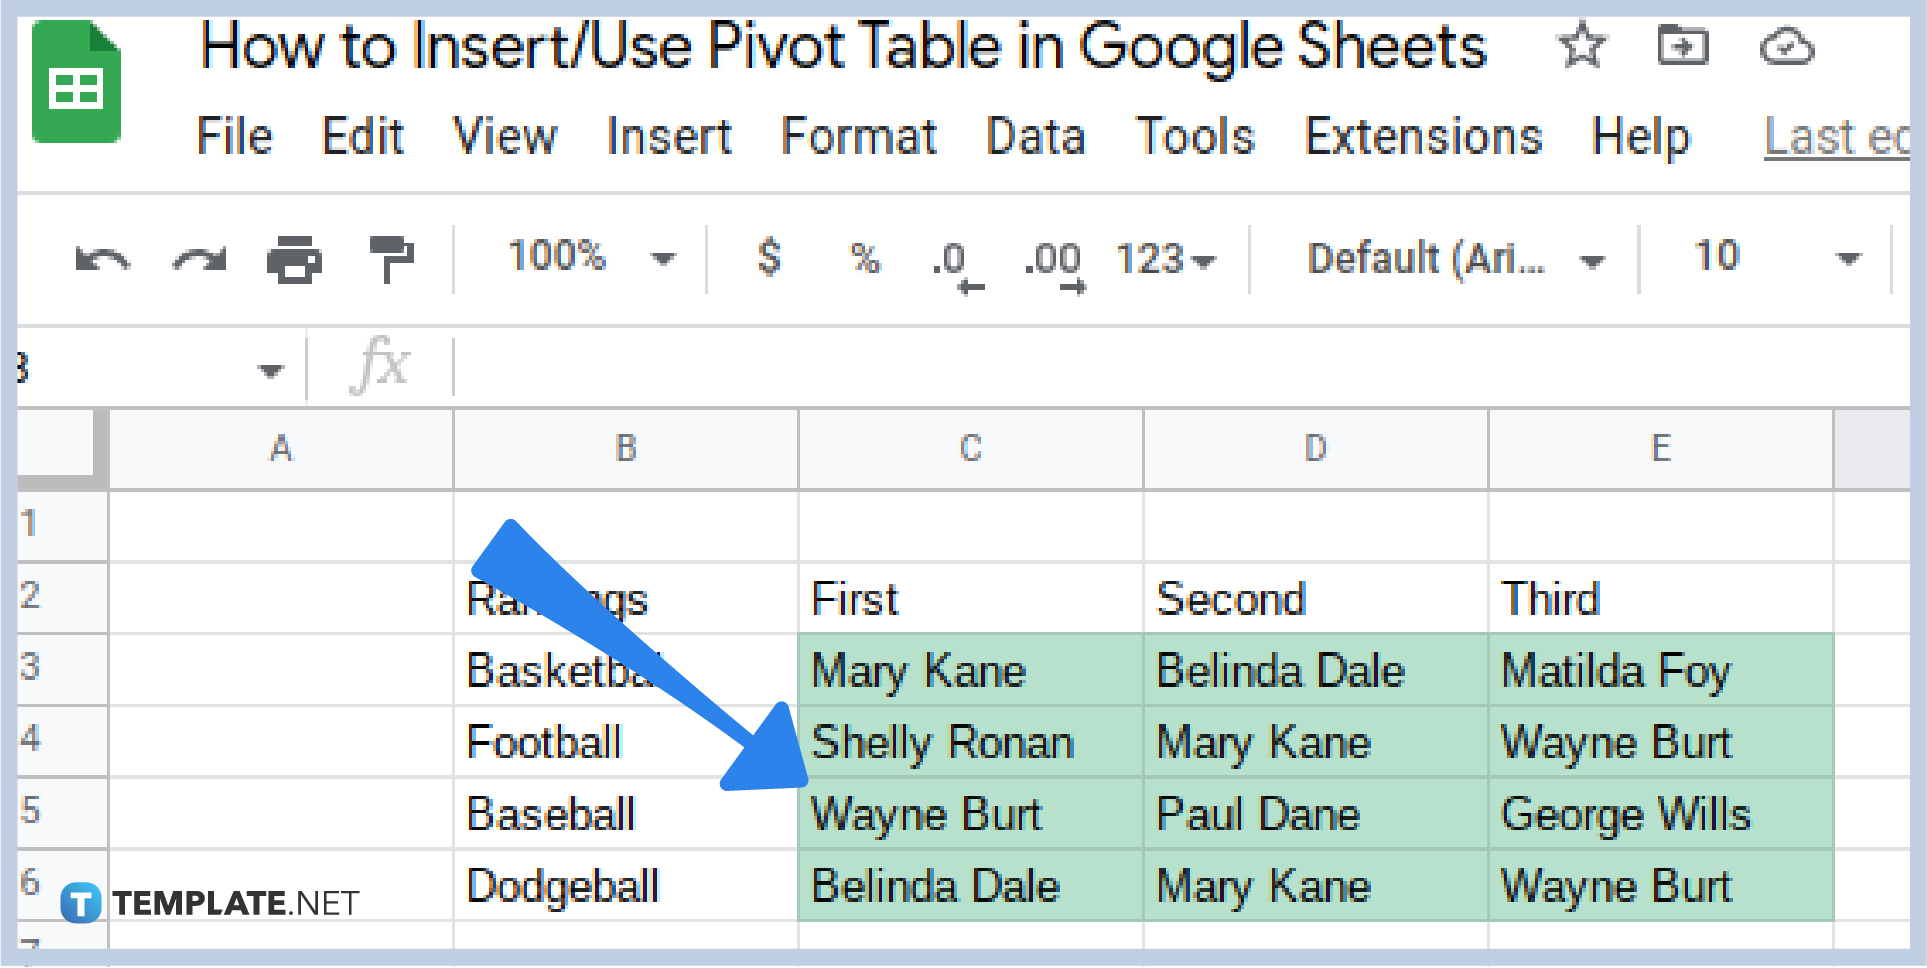 how-to-insertuse-pivot-table-in-google-sheets-step-1